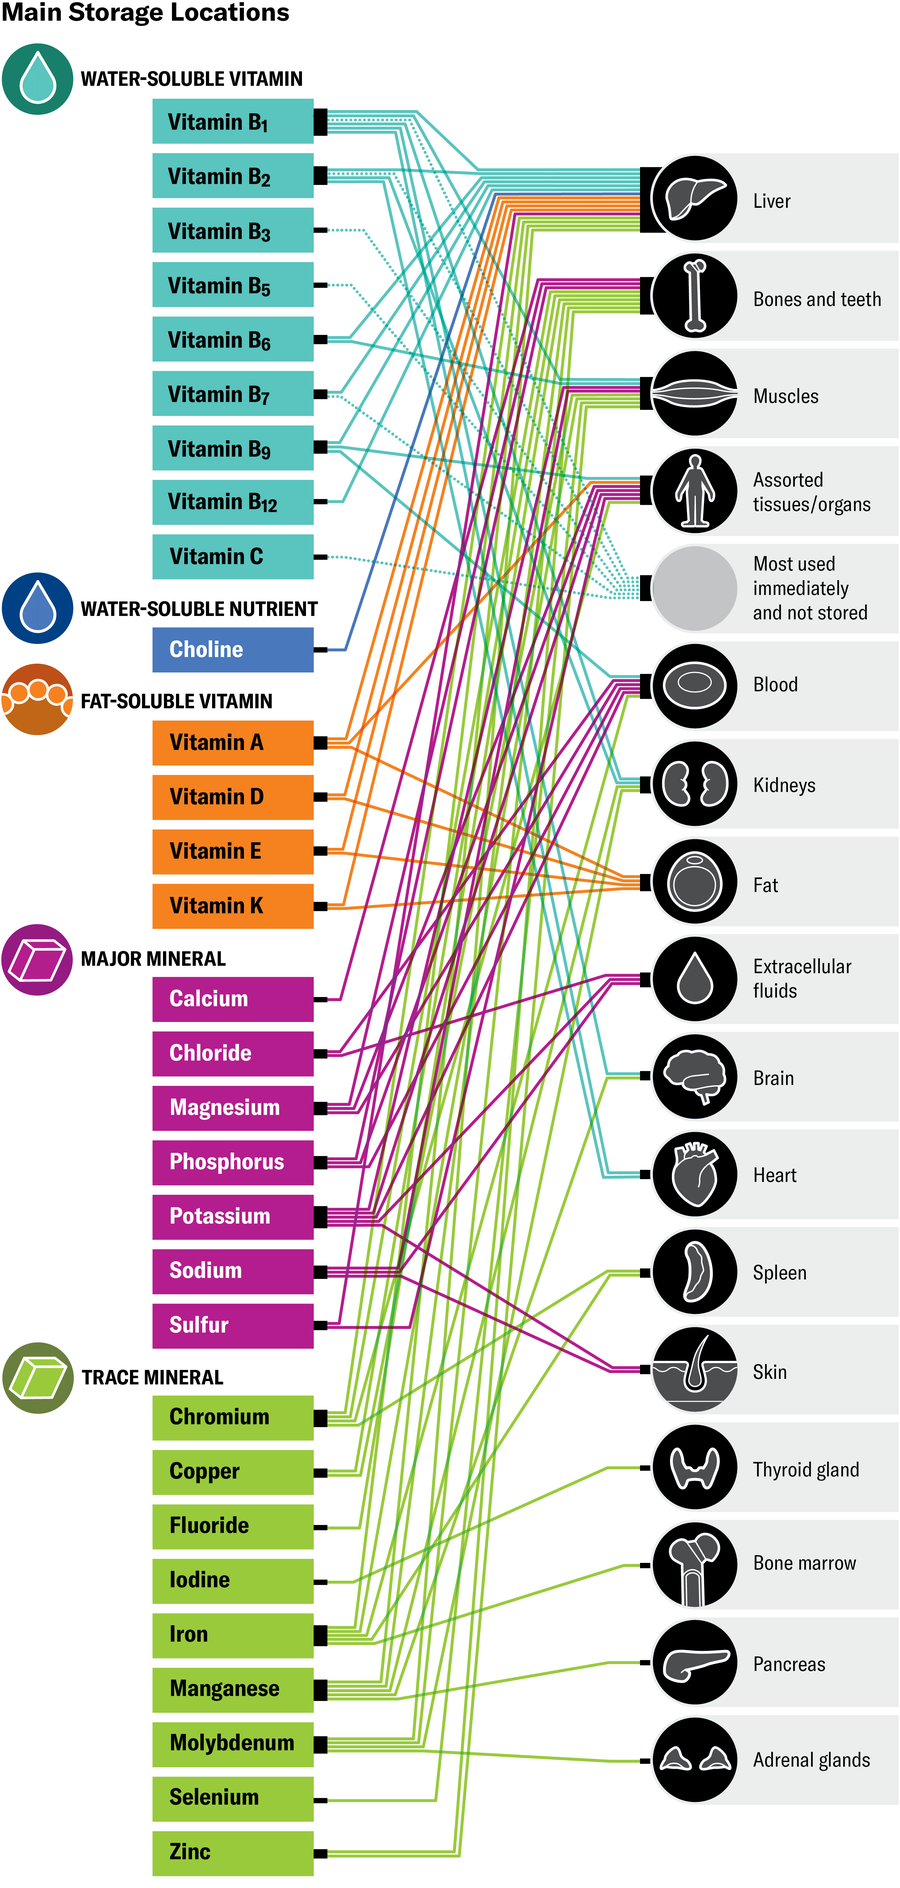 Graphic shows what human body parts different vitamins and minerals are stored in. The liver, bones and teeth, muscles and blood top the list for sheer number of different nutrients they hold for later use.